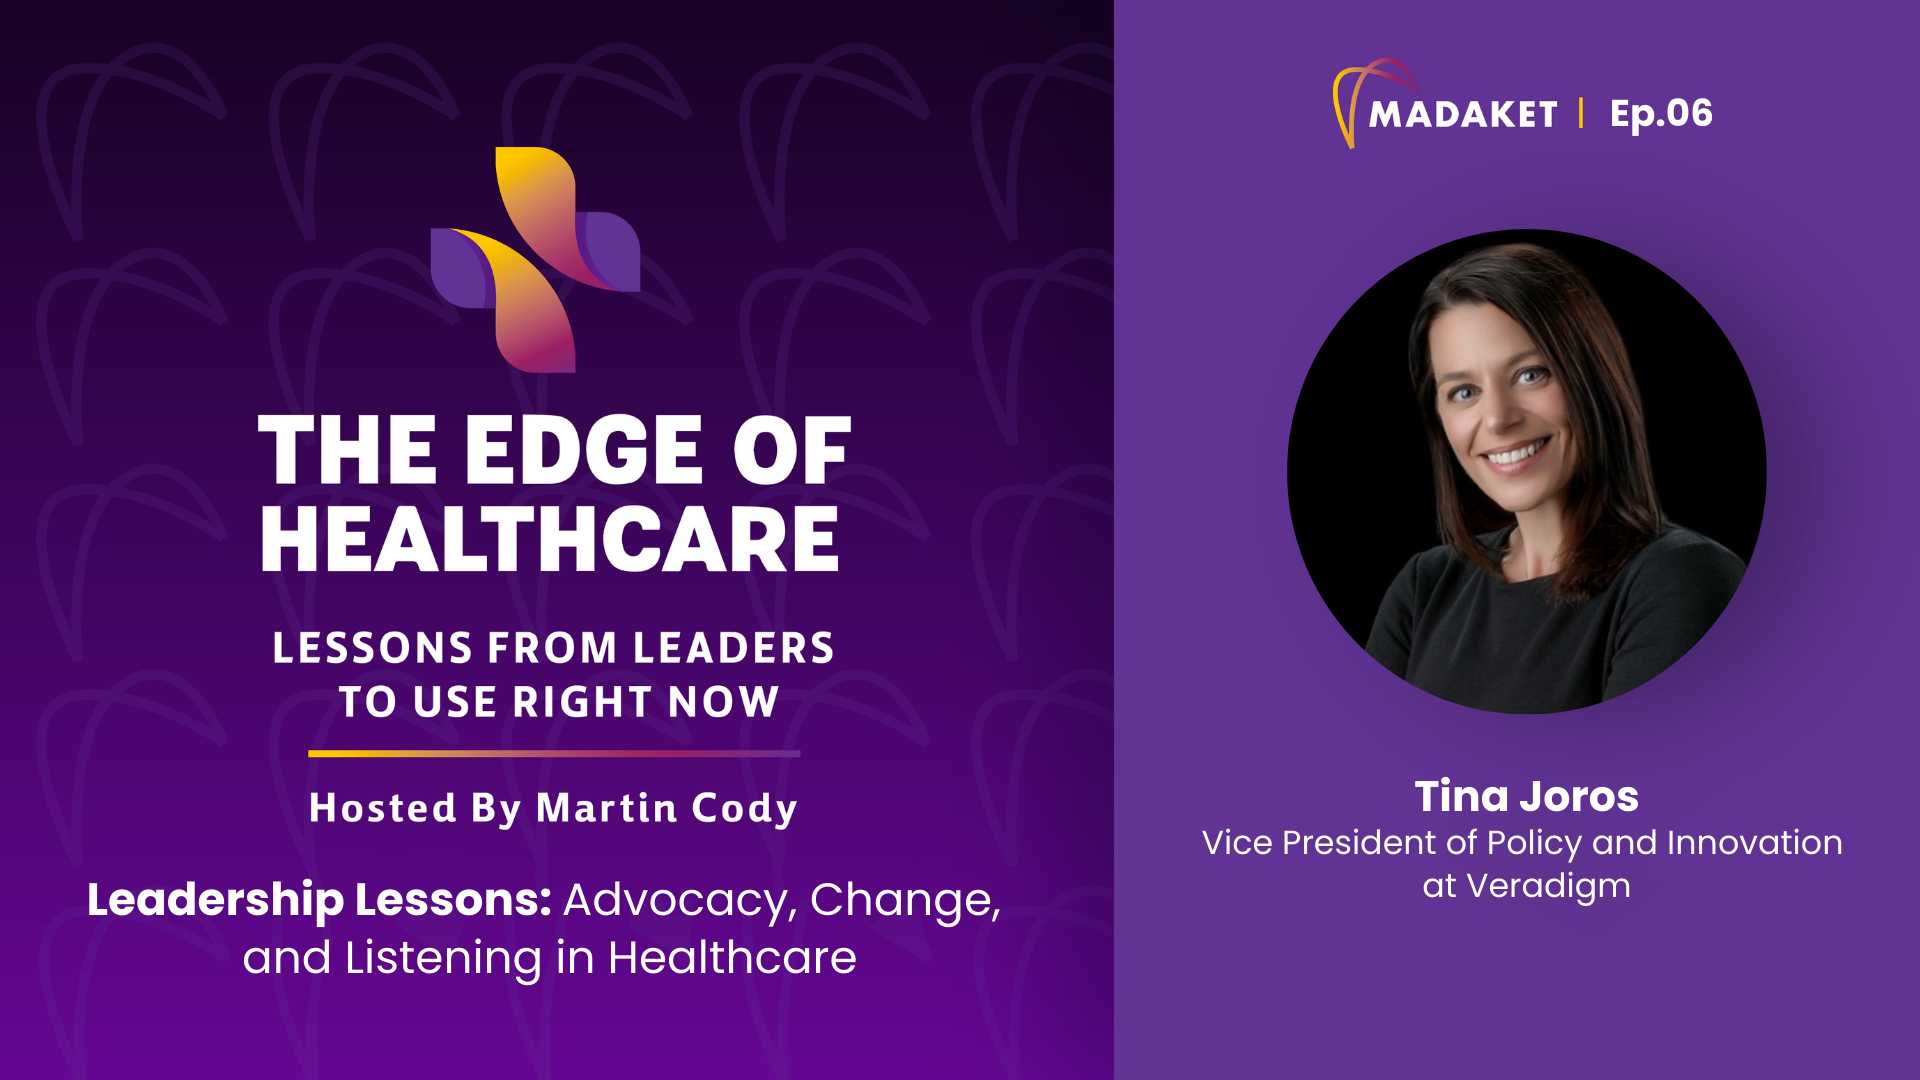 The Edge of Healthcare - Lessons from Leaders to Use Right Now with Tina Joros